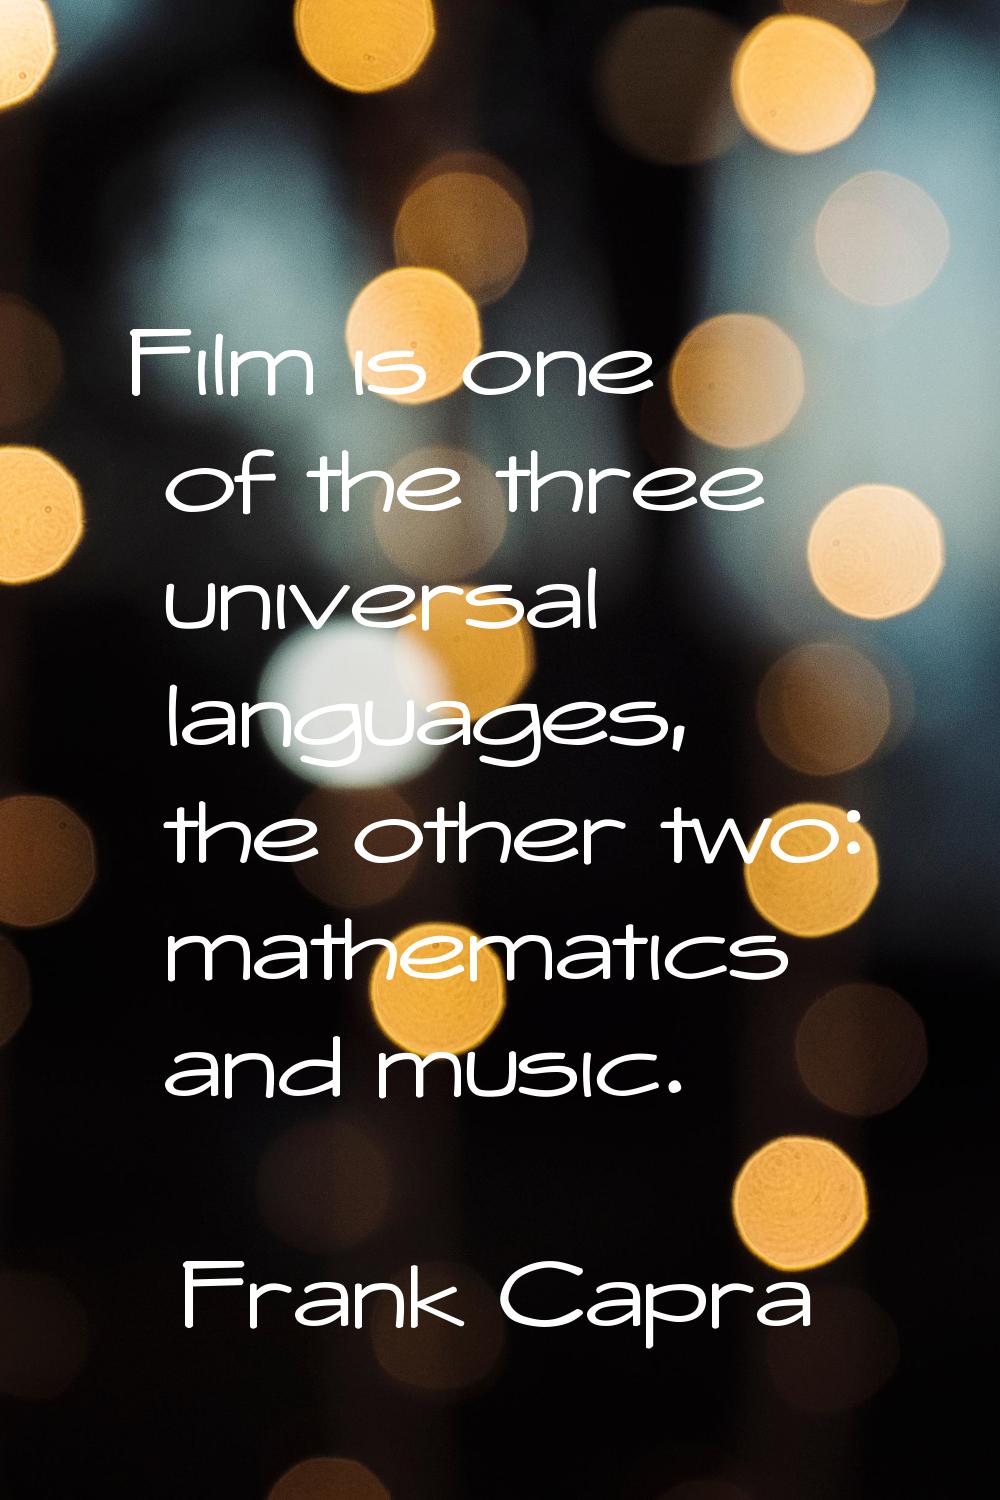 Film is one of the three universal languages, the other two: mathematics and music.